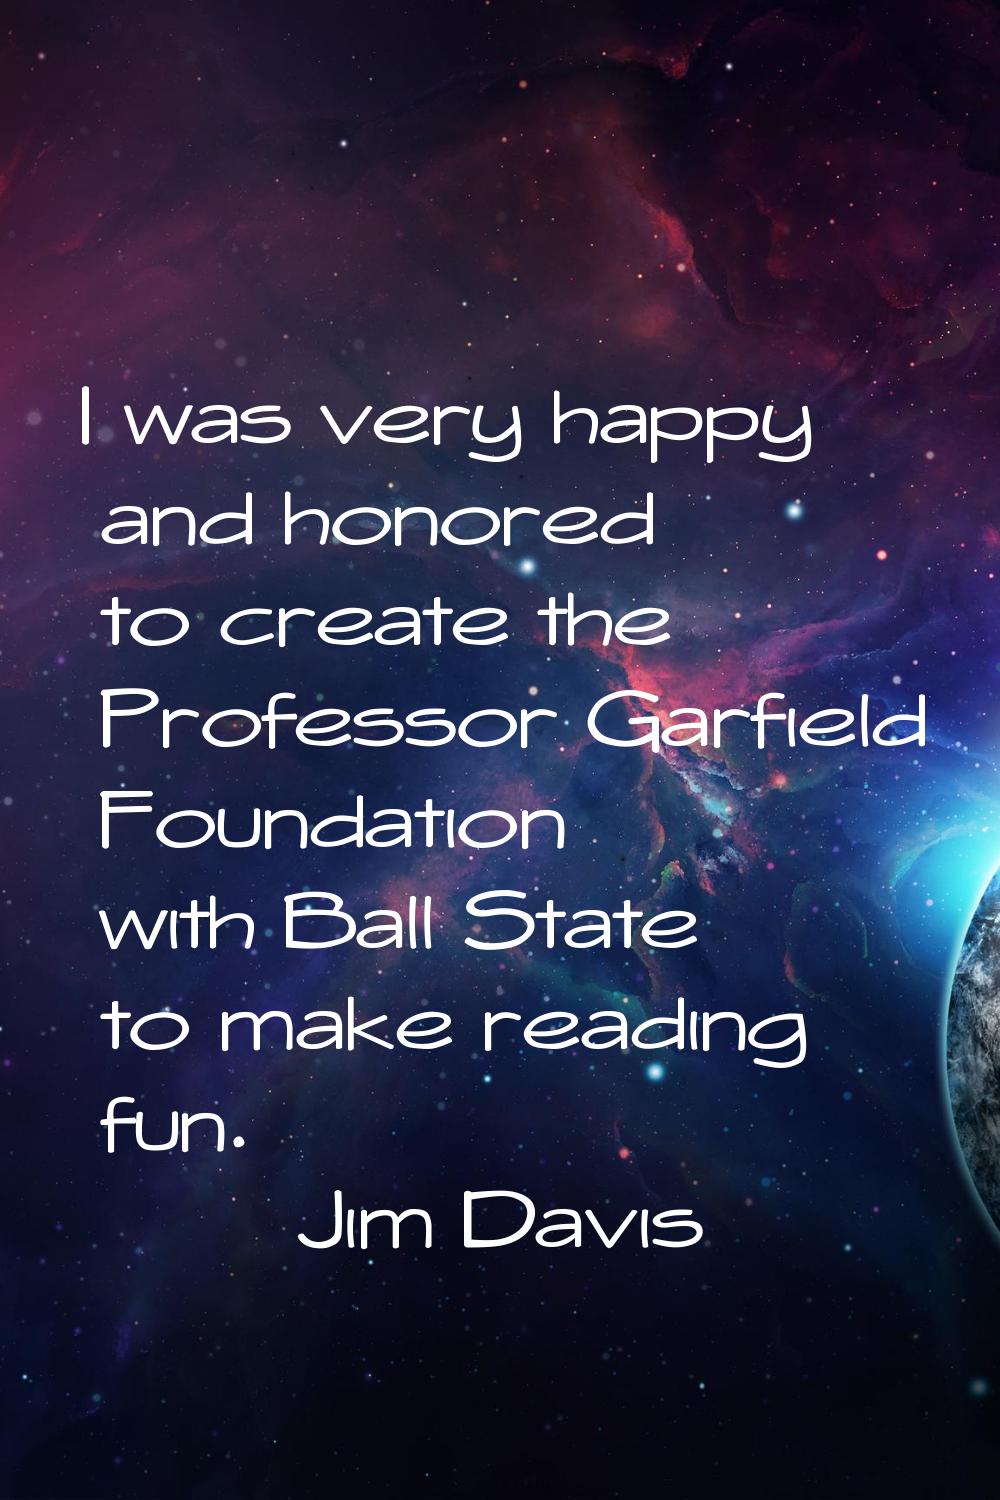 I was very happy and honored to create the Professor Garfield Foundation with Ball State to make re